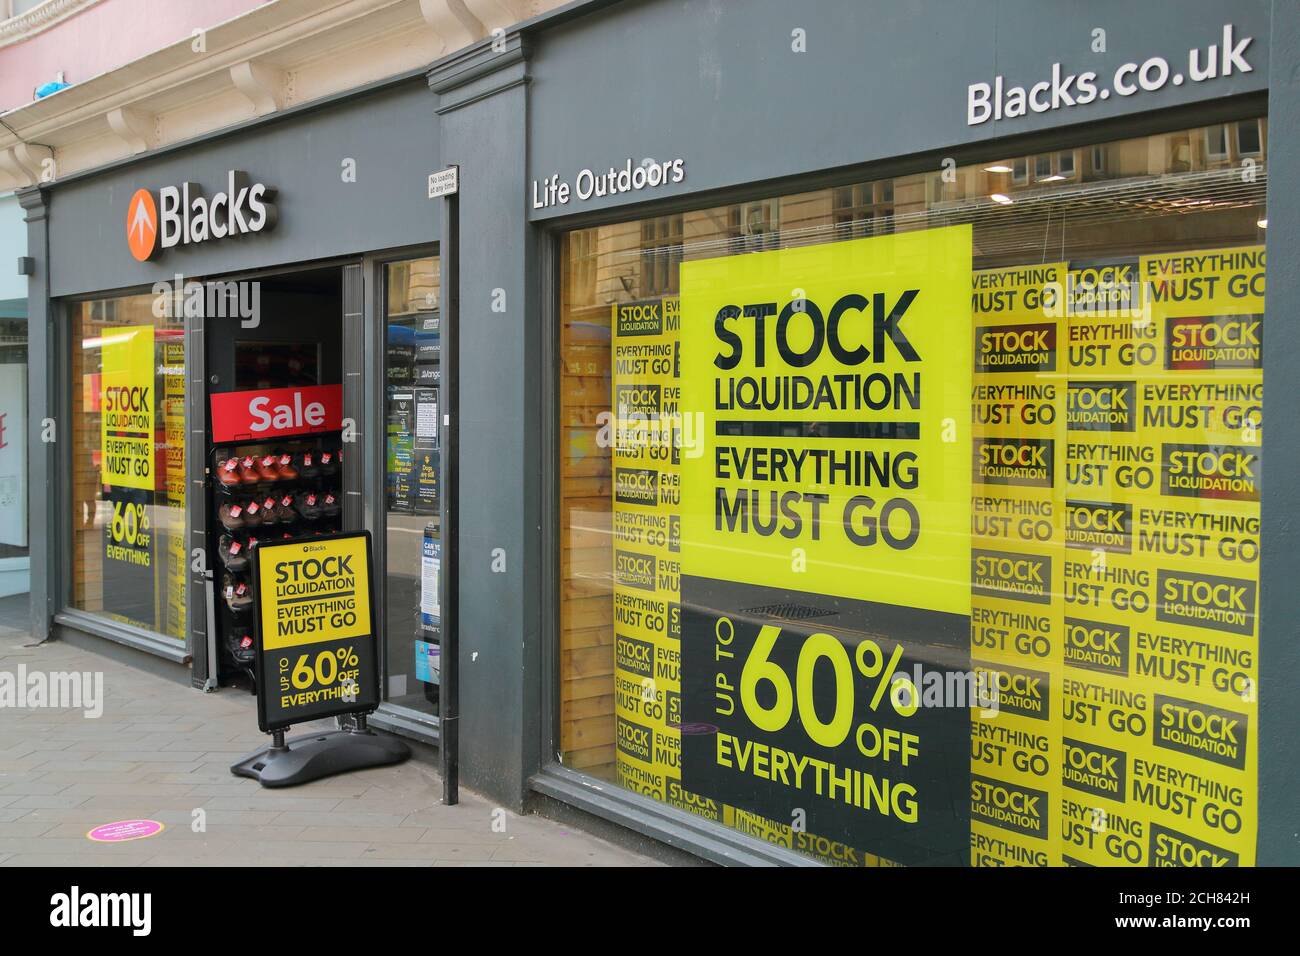 Blacks Outdoor Equipment specialist outlet in Brighton, UK Stock Photo